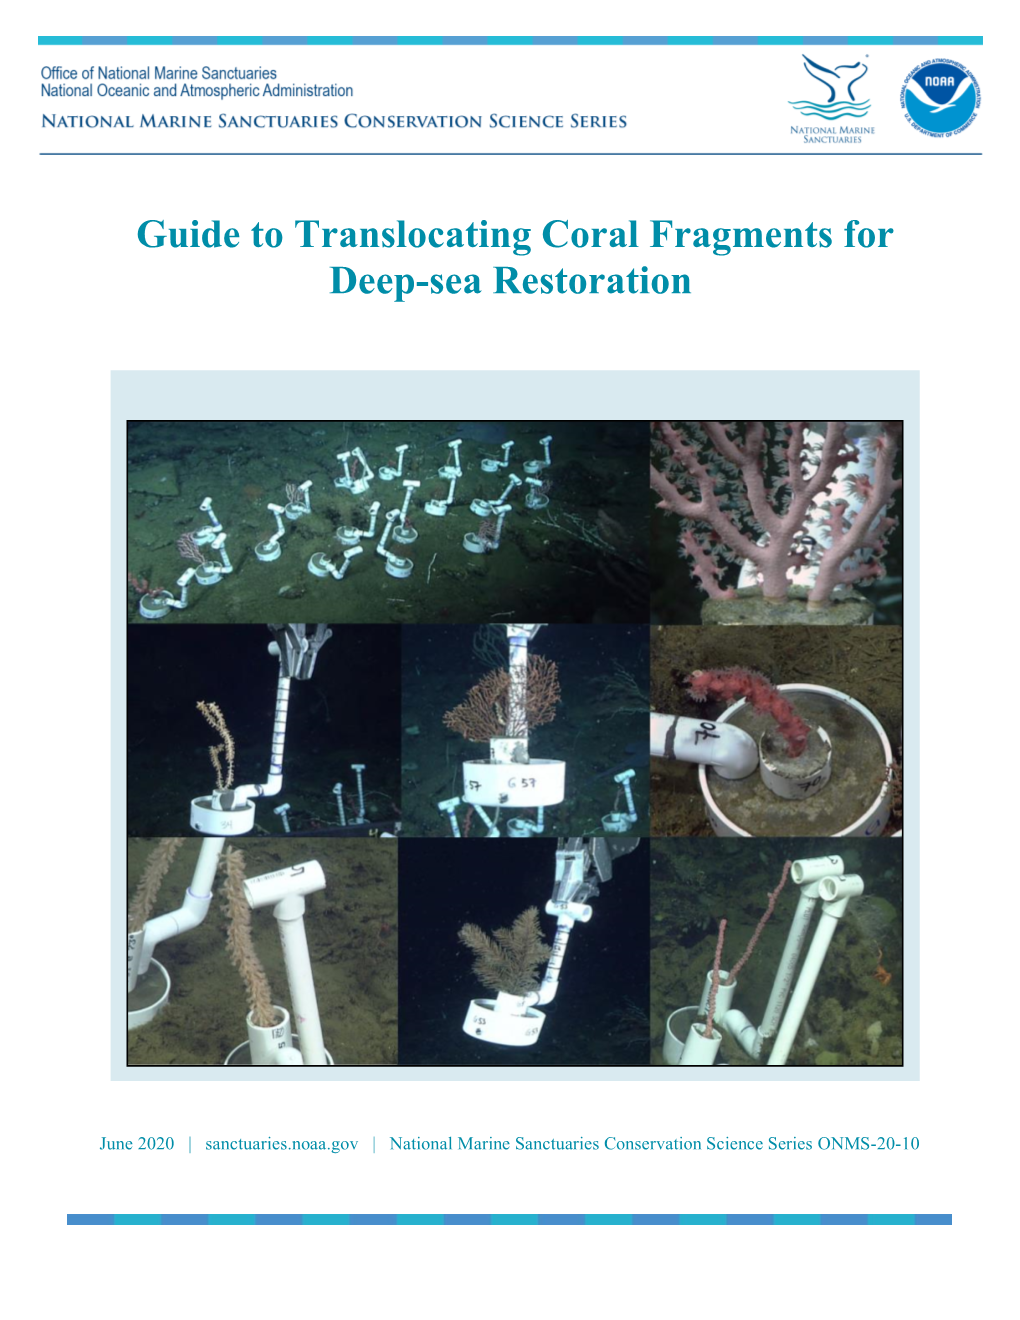 Guide to Translocating Coral Fragments for Deep-Sea Restoration